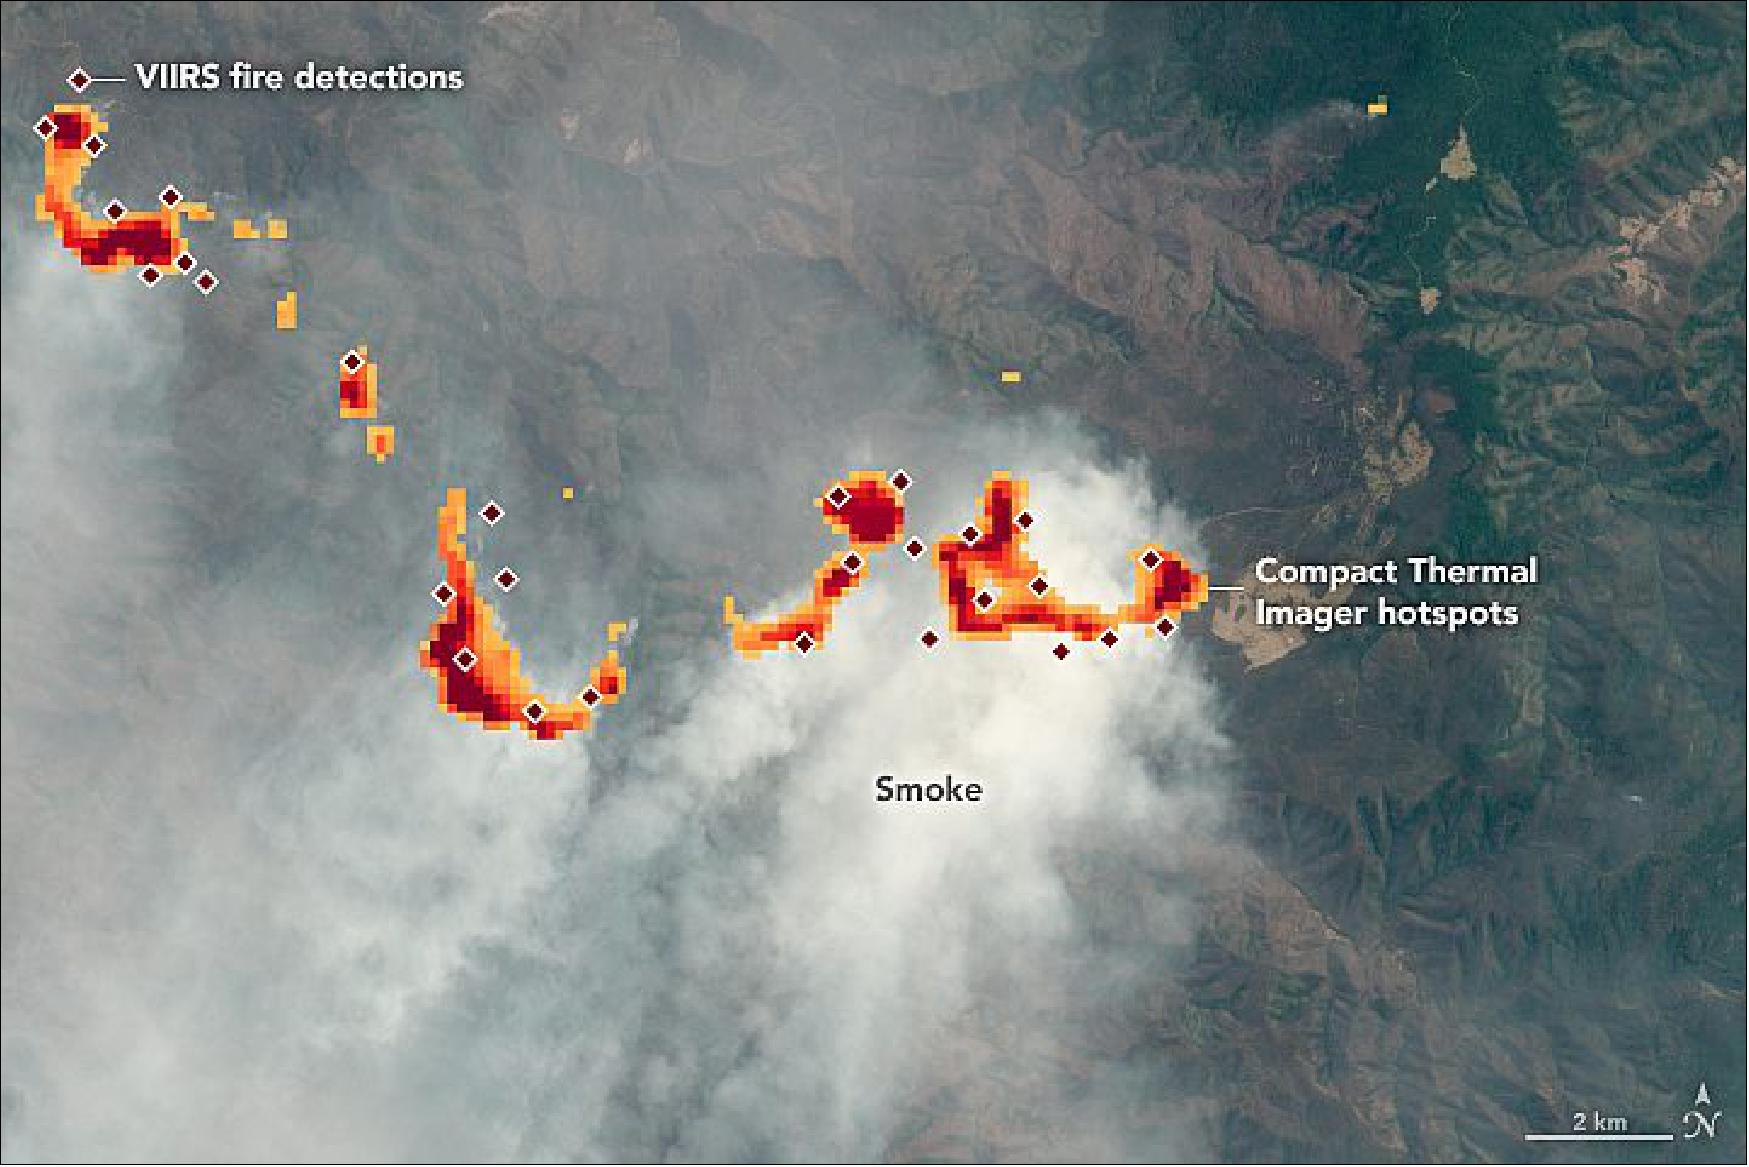 Figure 90: This image was acquired on 1 November 2019 by the Sentinel-2 satellite of ESA, showing a more detailed view of one of the fire clusters, along with the CTI data (image credit: NASA Earth Observatory)